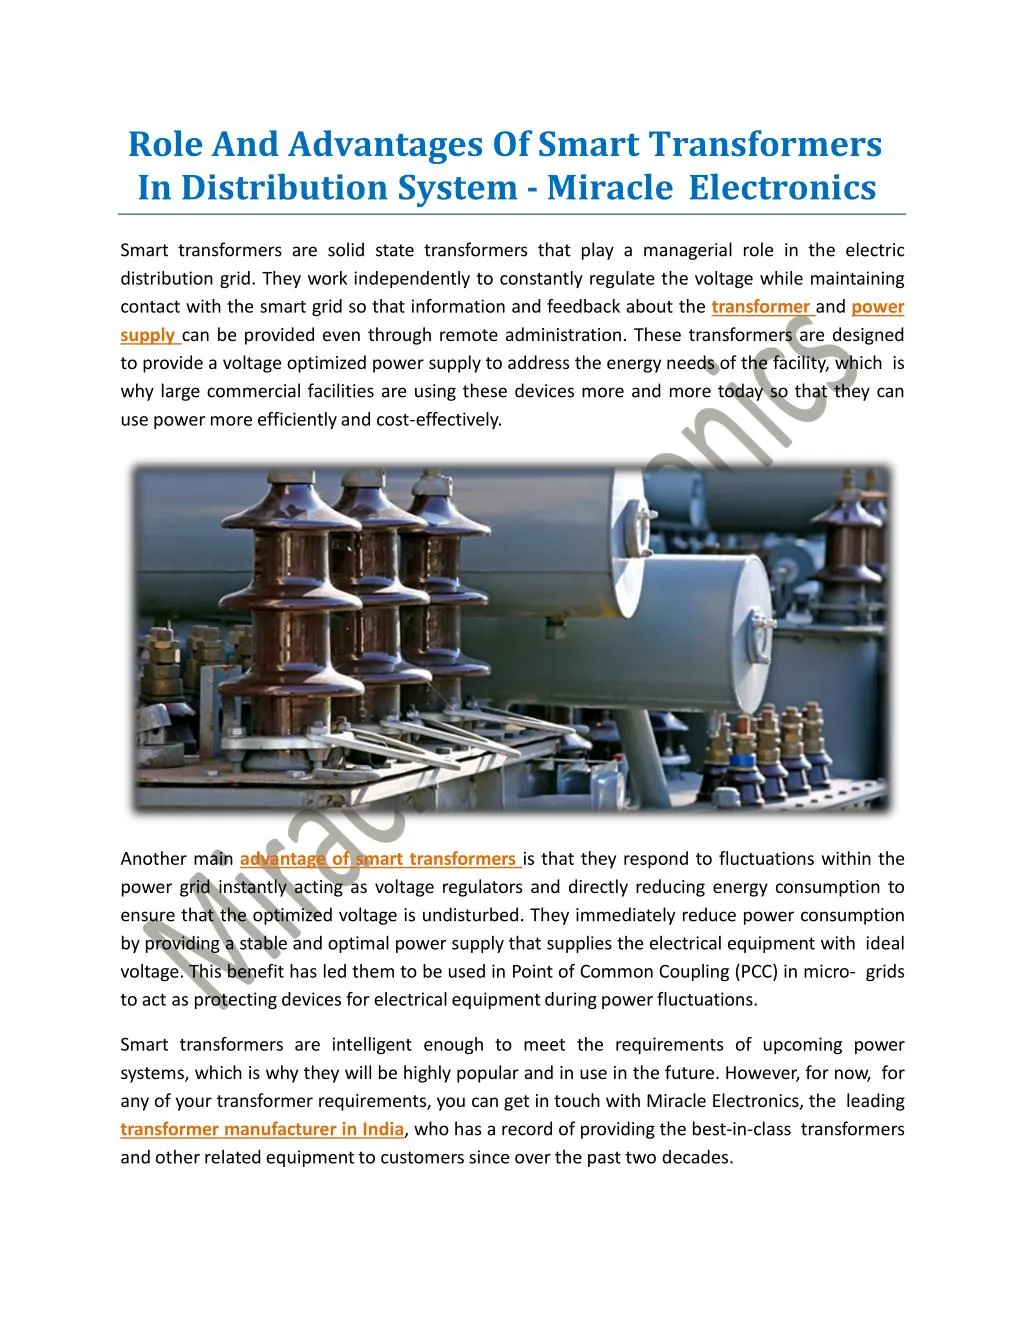 role and advantages of smart transformers in distribution system miracle electronics